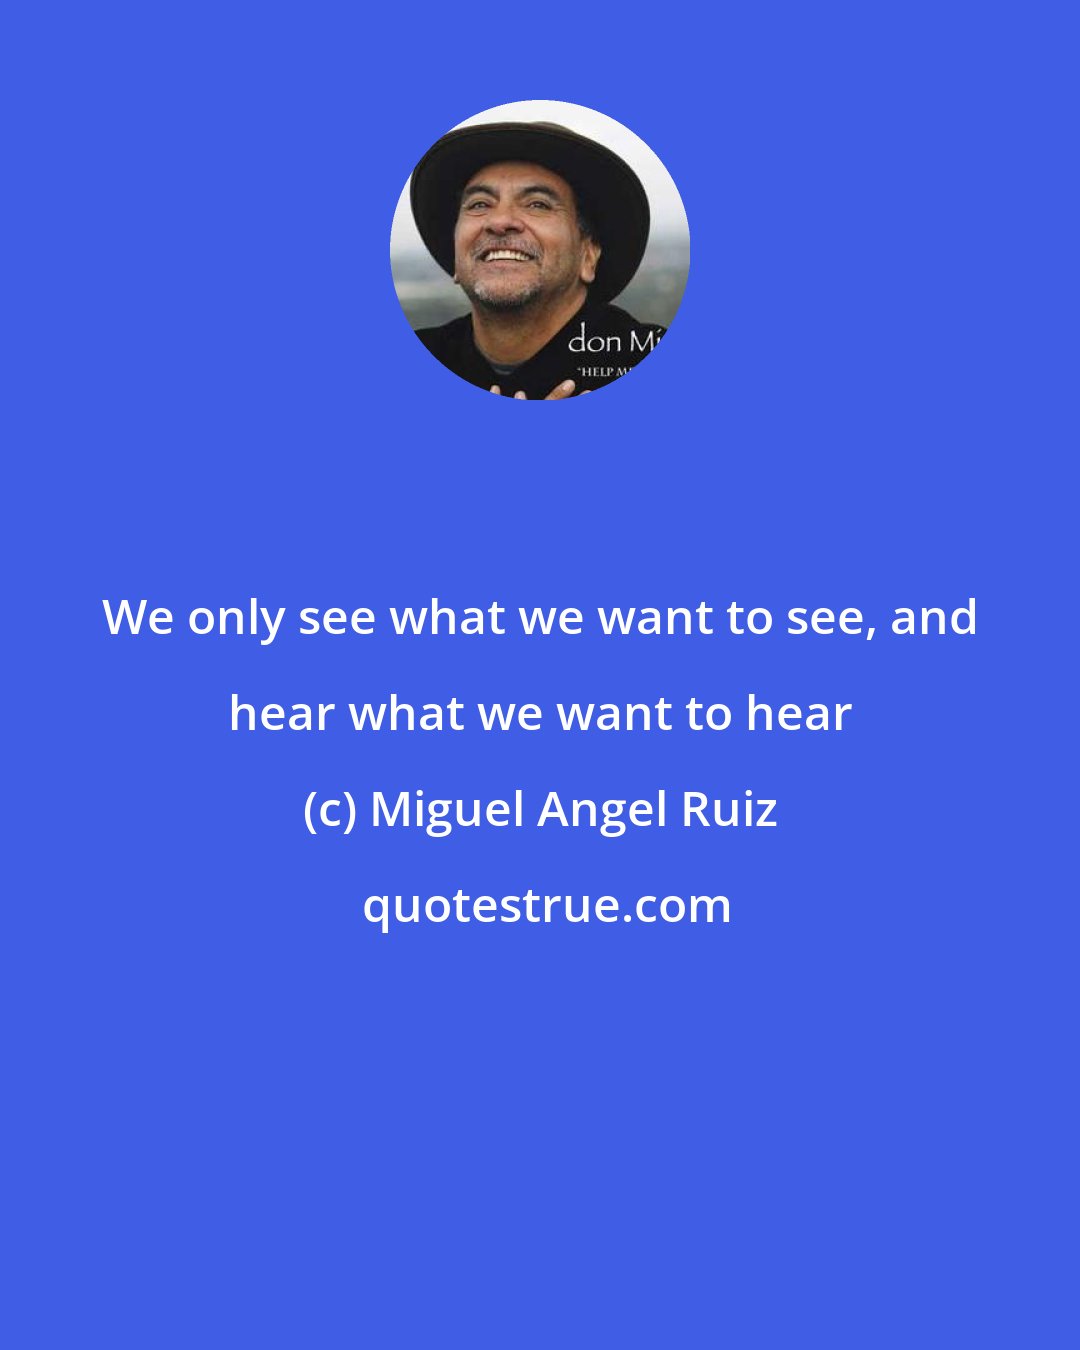 Miguel Angel Ruiz: We only see what we want to see, and hear what we want to hear